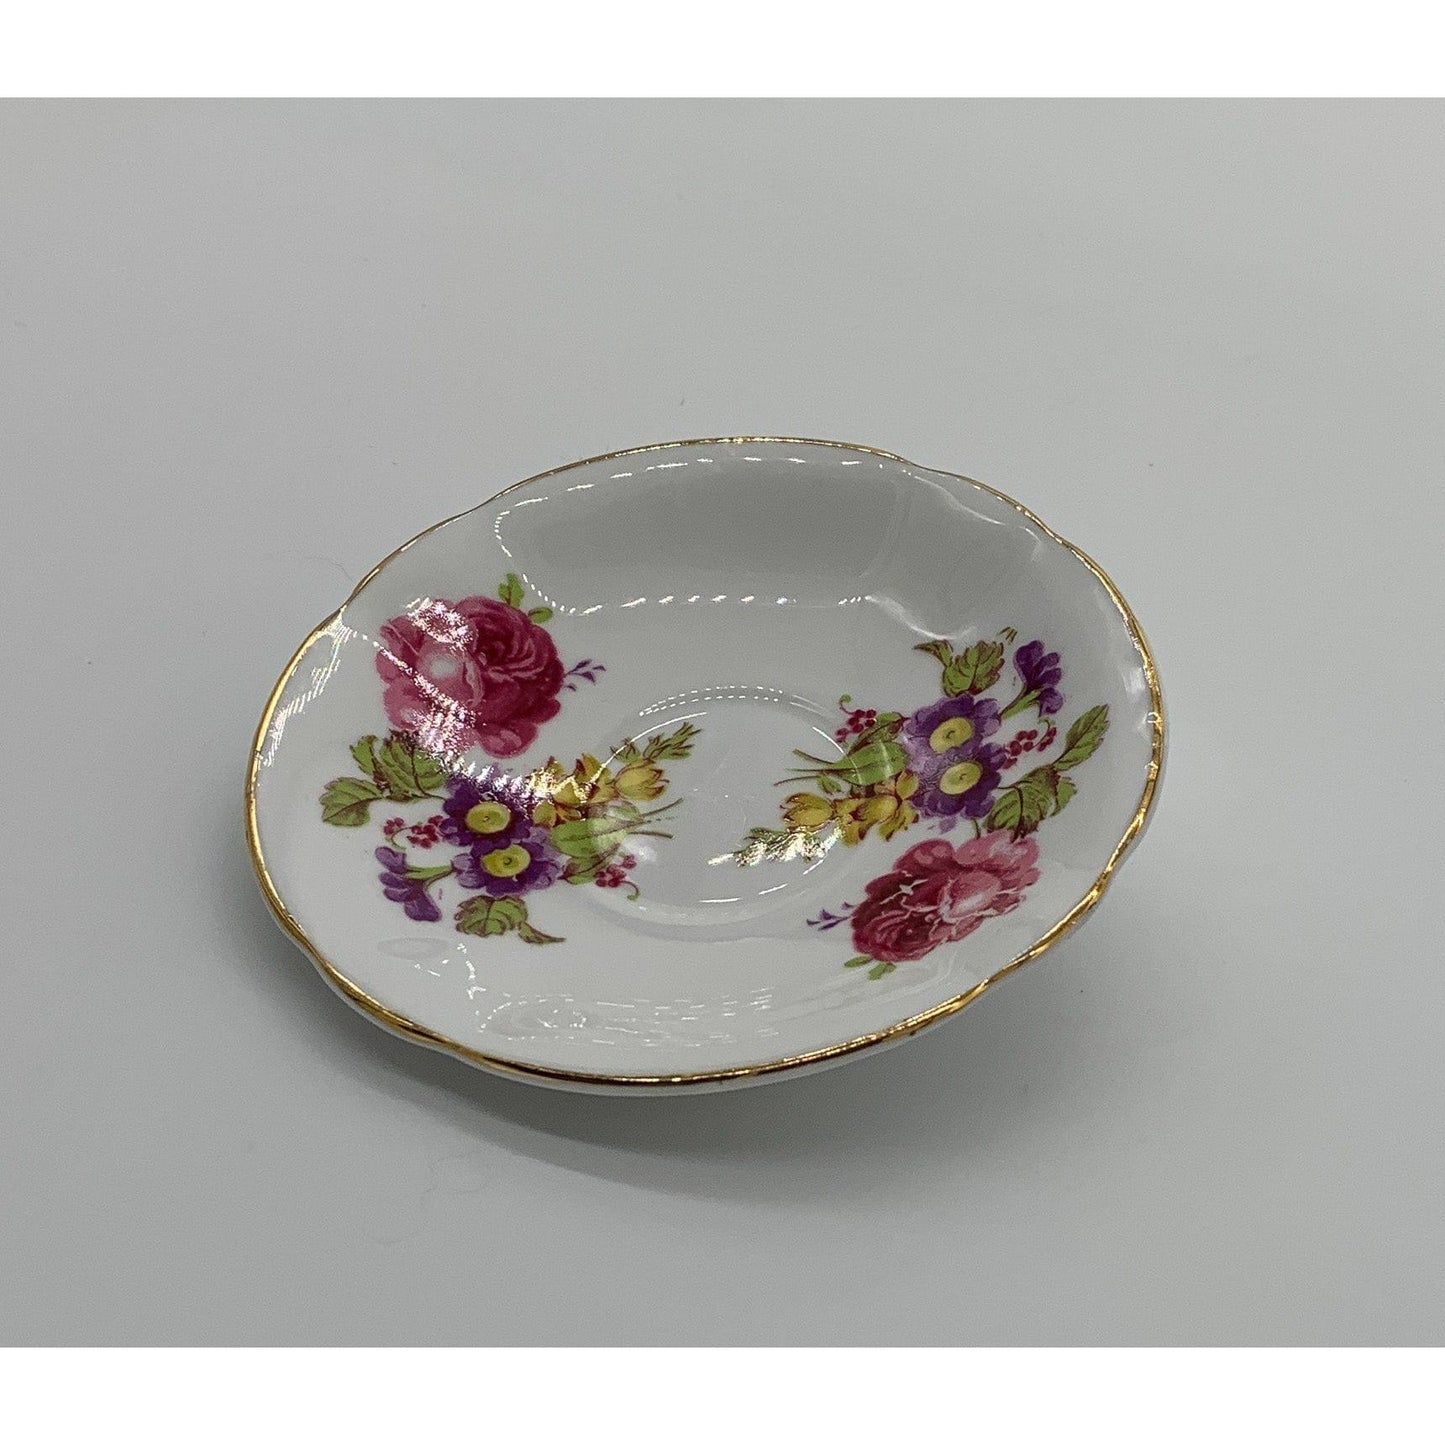 Small Flowered Saucer, Ivory with red, gold and green, gold edging